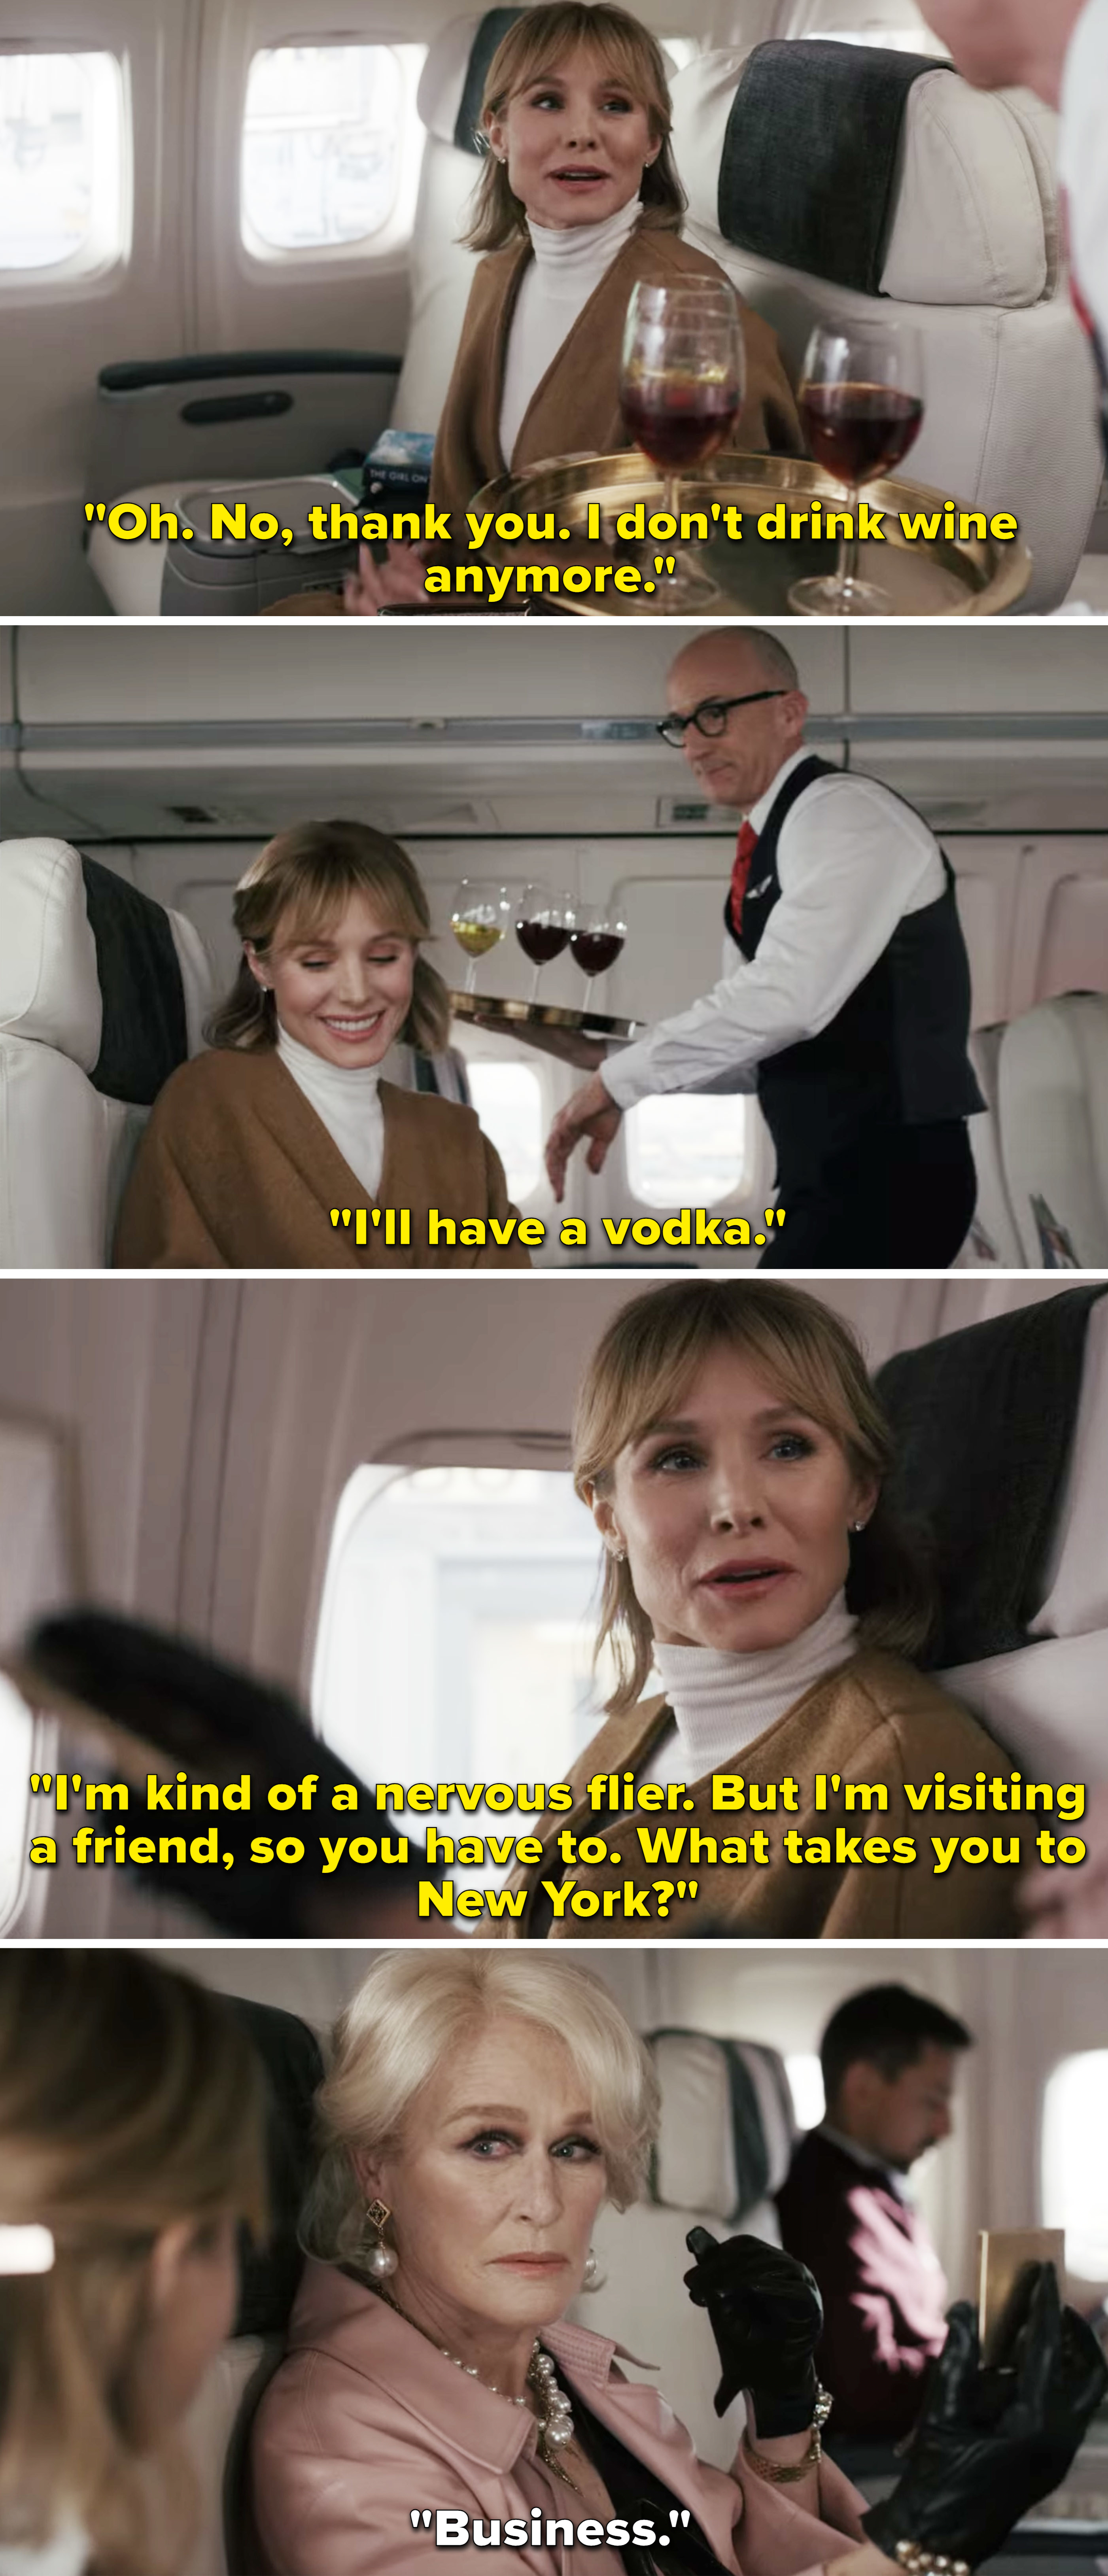 Anna, who is on a plane, saying she doesn&#x27;t drink wine anymore, but will have vodka and then asking her seat neighbor, who is played by Glenn Close, why she&#x27;s going to NYC